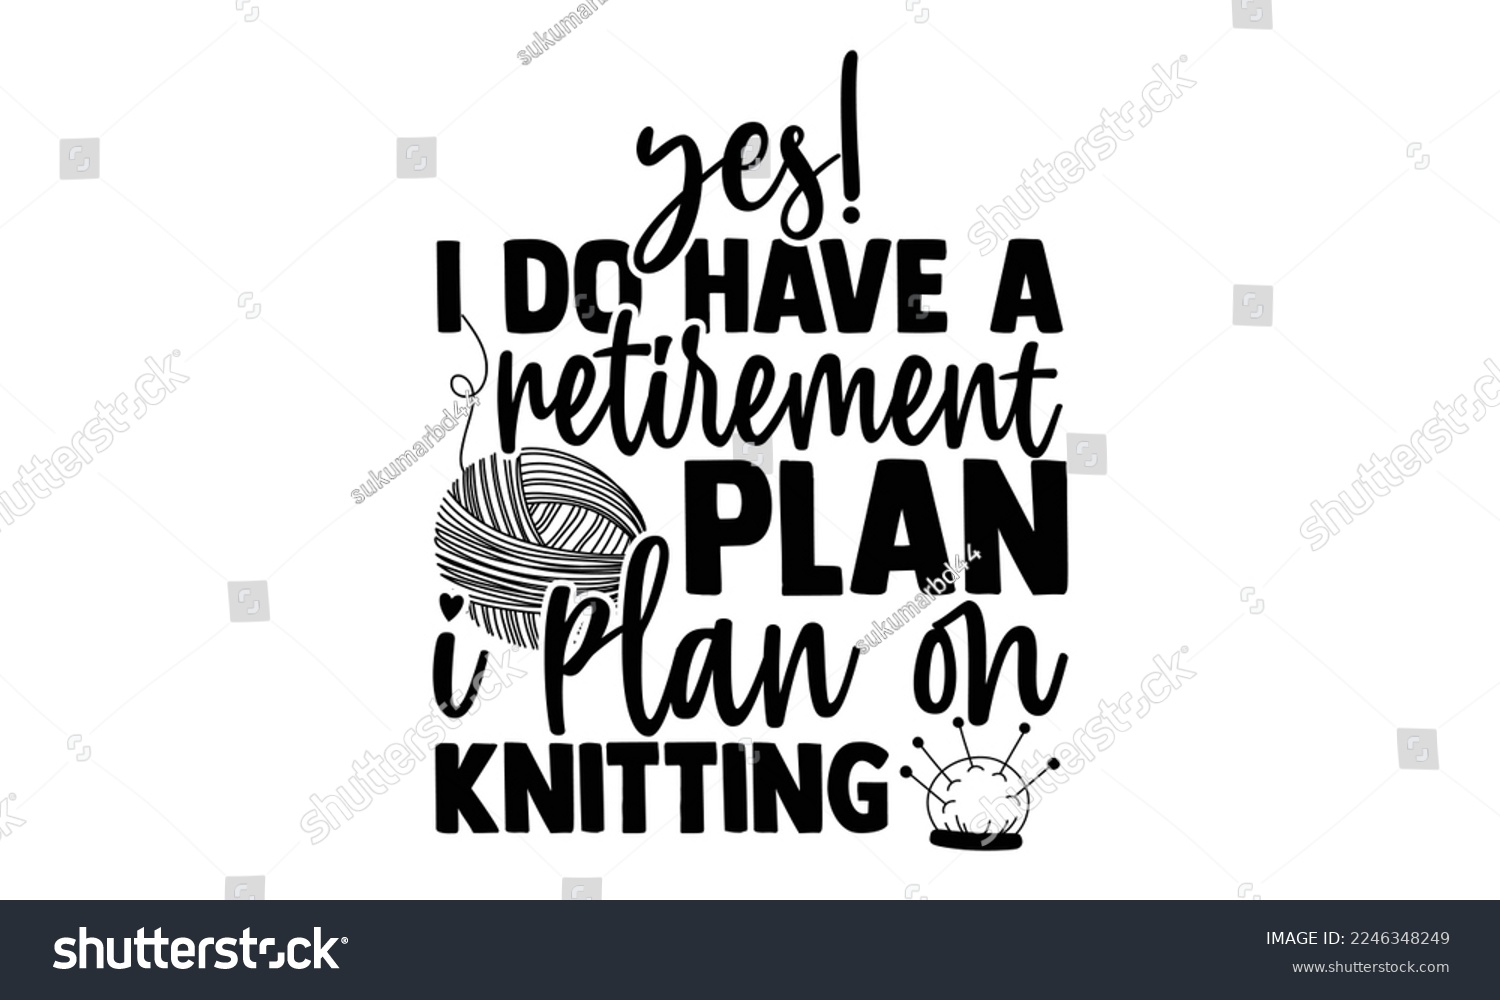 SVG of Yes! I Do Have A Retirement Plan I Plan On Knitting - Vector illustration with Knitting phrase Design. Hand drawn Lettering for poster, t-shirt, card, invitation, sticker. svg for Cutting Machine, svg